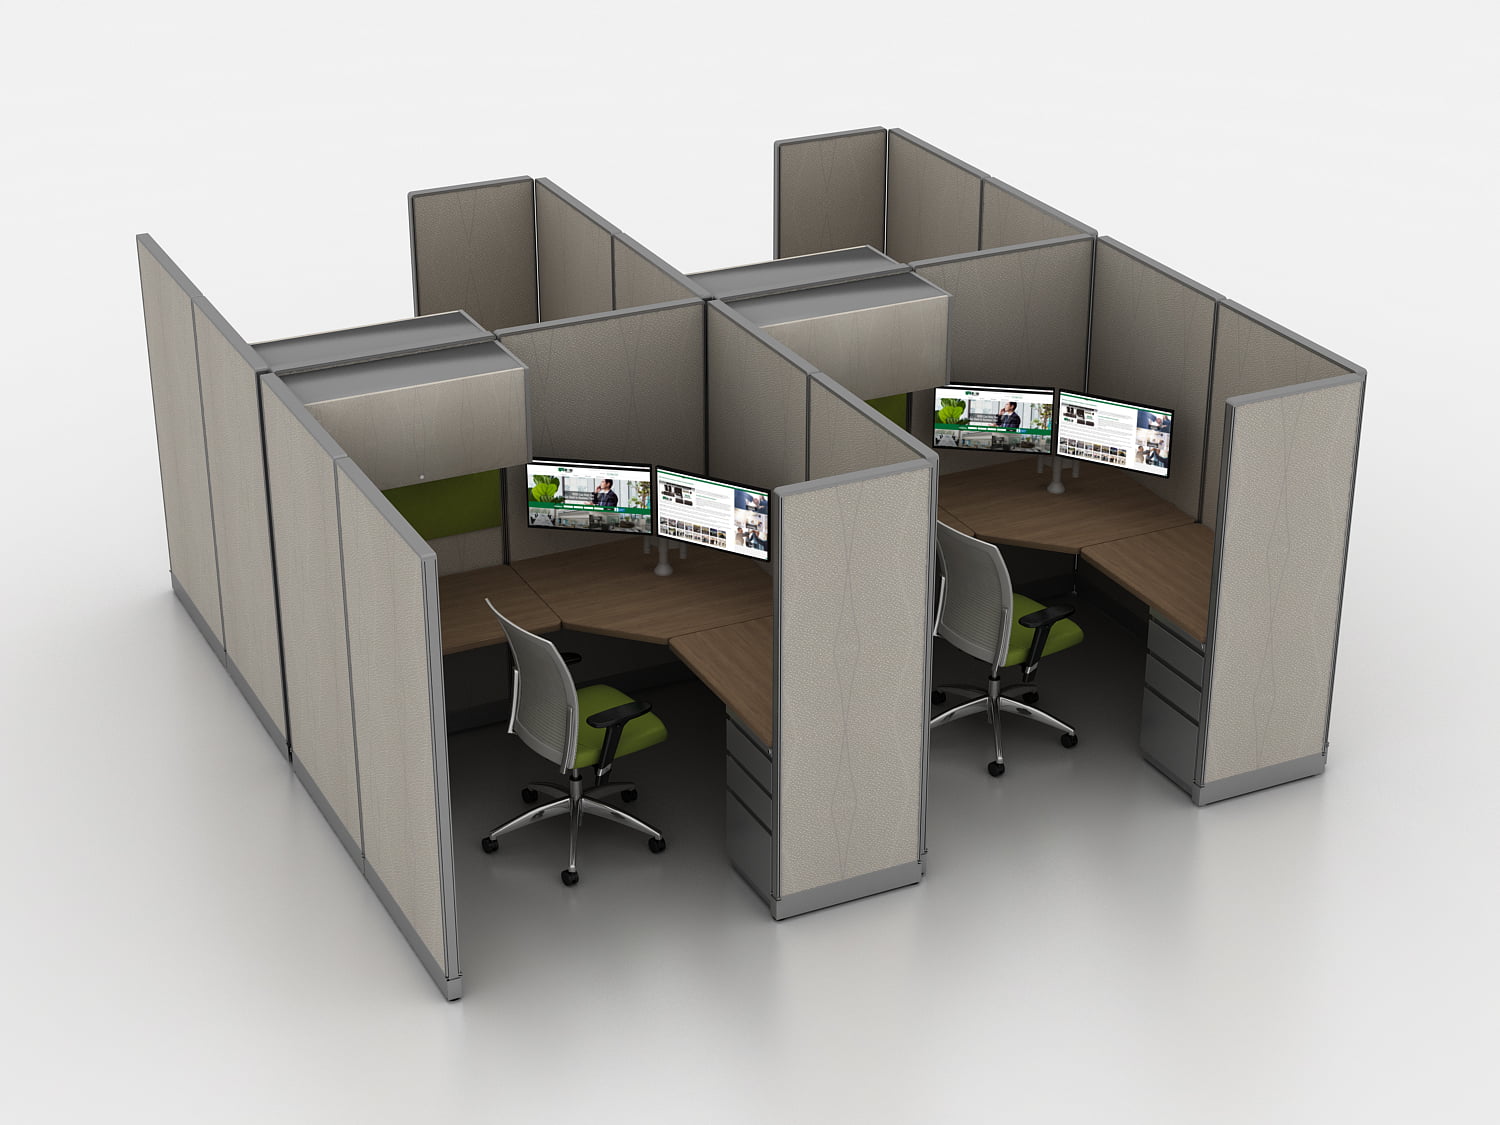 Cubicles & Office Furniture, Office Cubicle Design, Modern Office Cubicles  For Sale